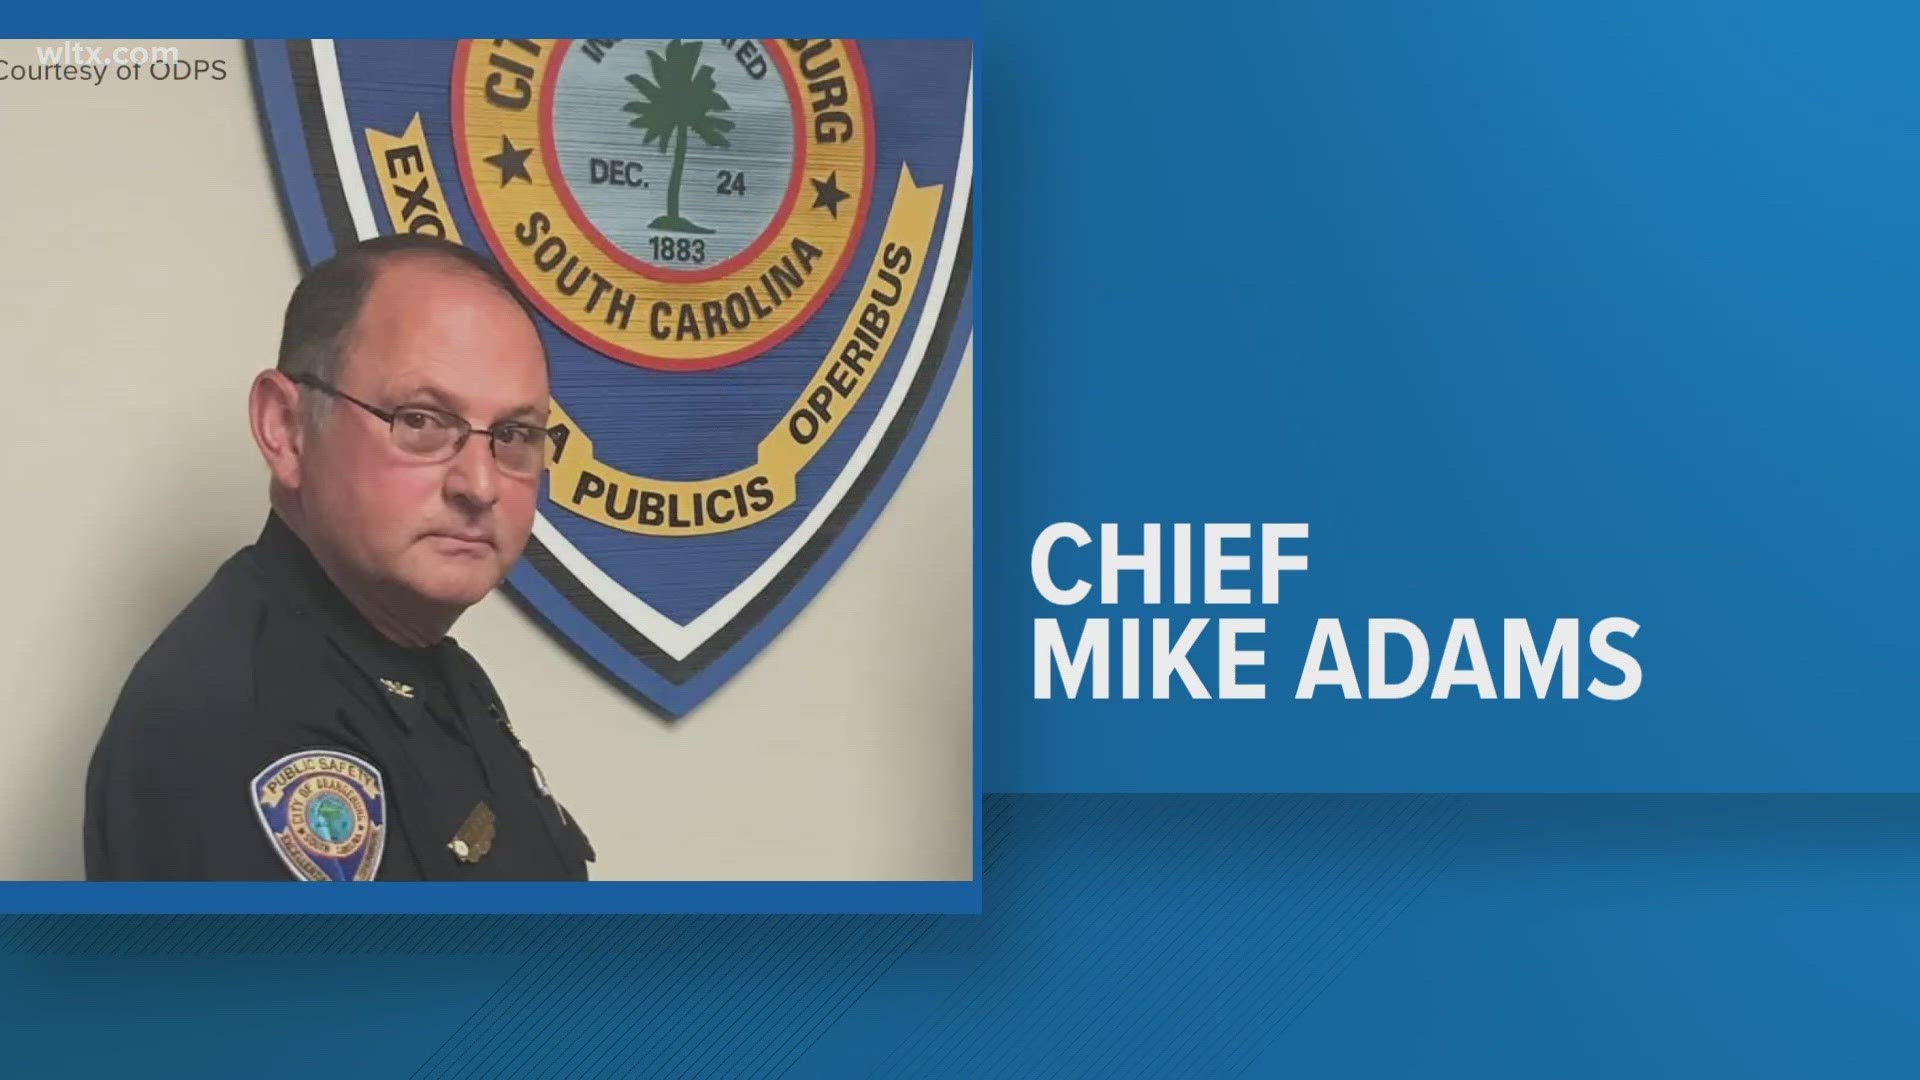 Mike Adams worked for the department for 35 years before retiring in 2021.